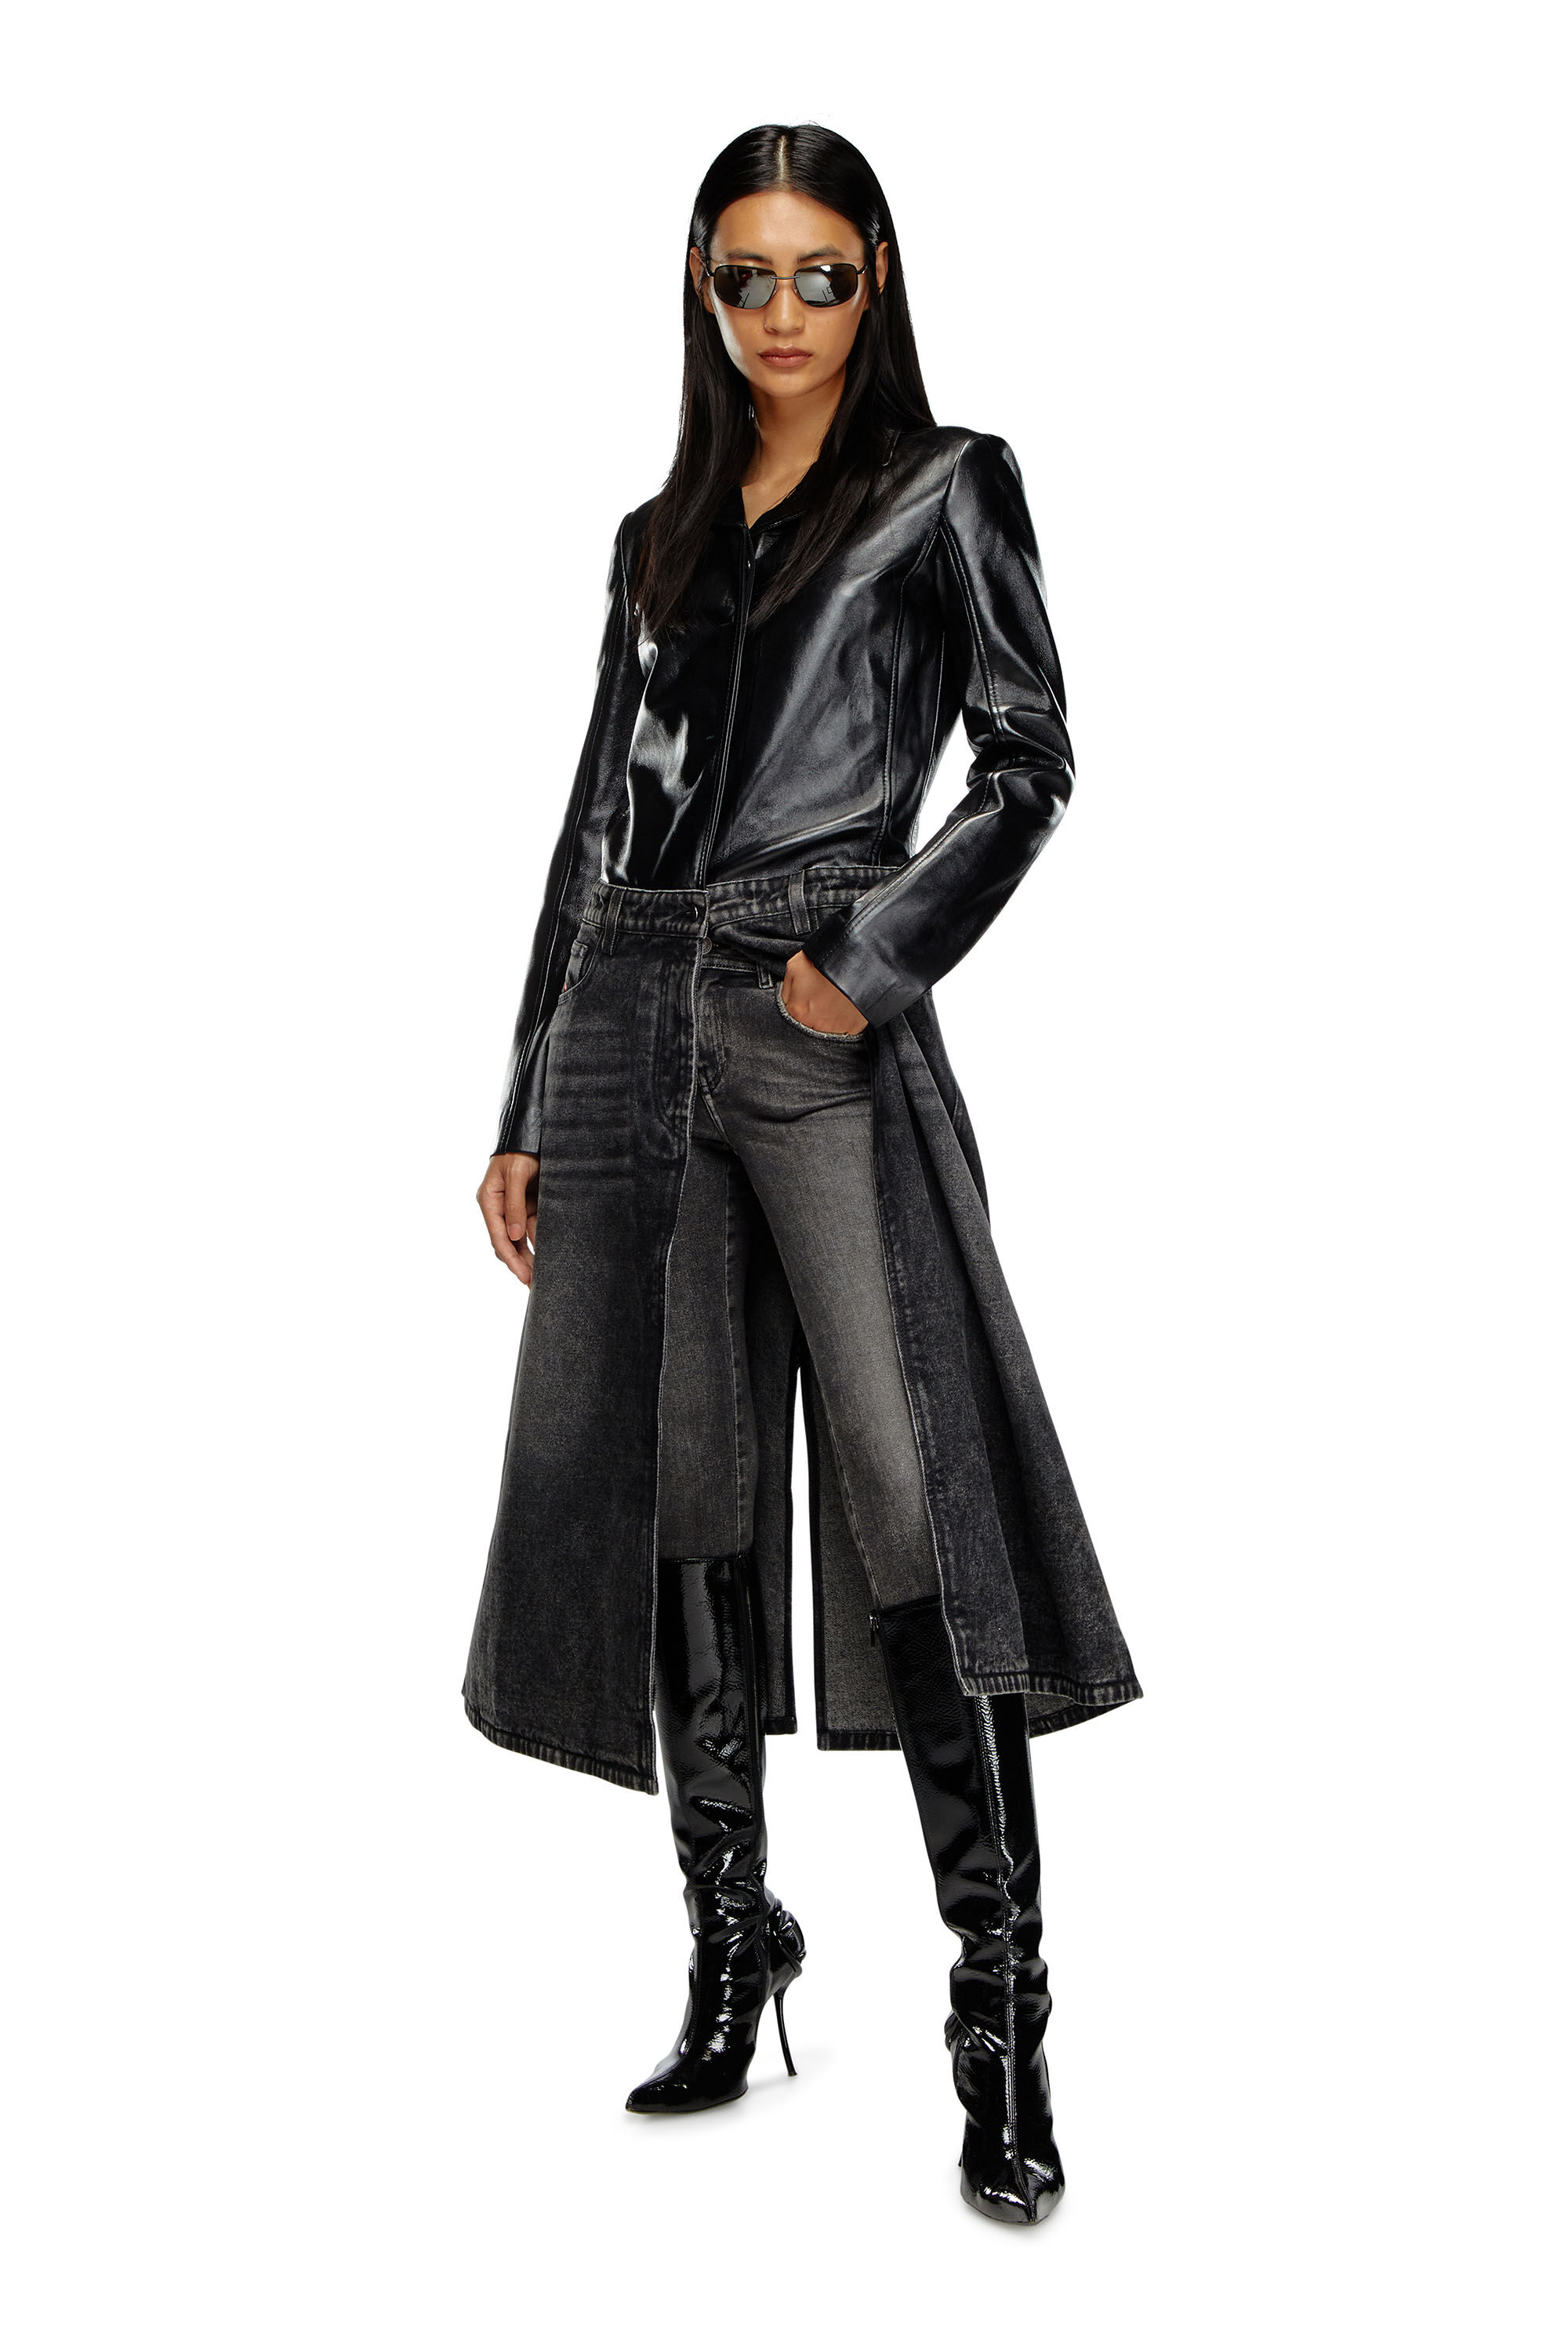 Diesel - L-ORY, Woman Hybrid coat in denim and leather in Black - Image 3